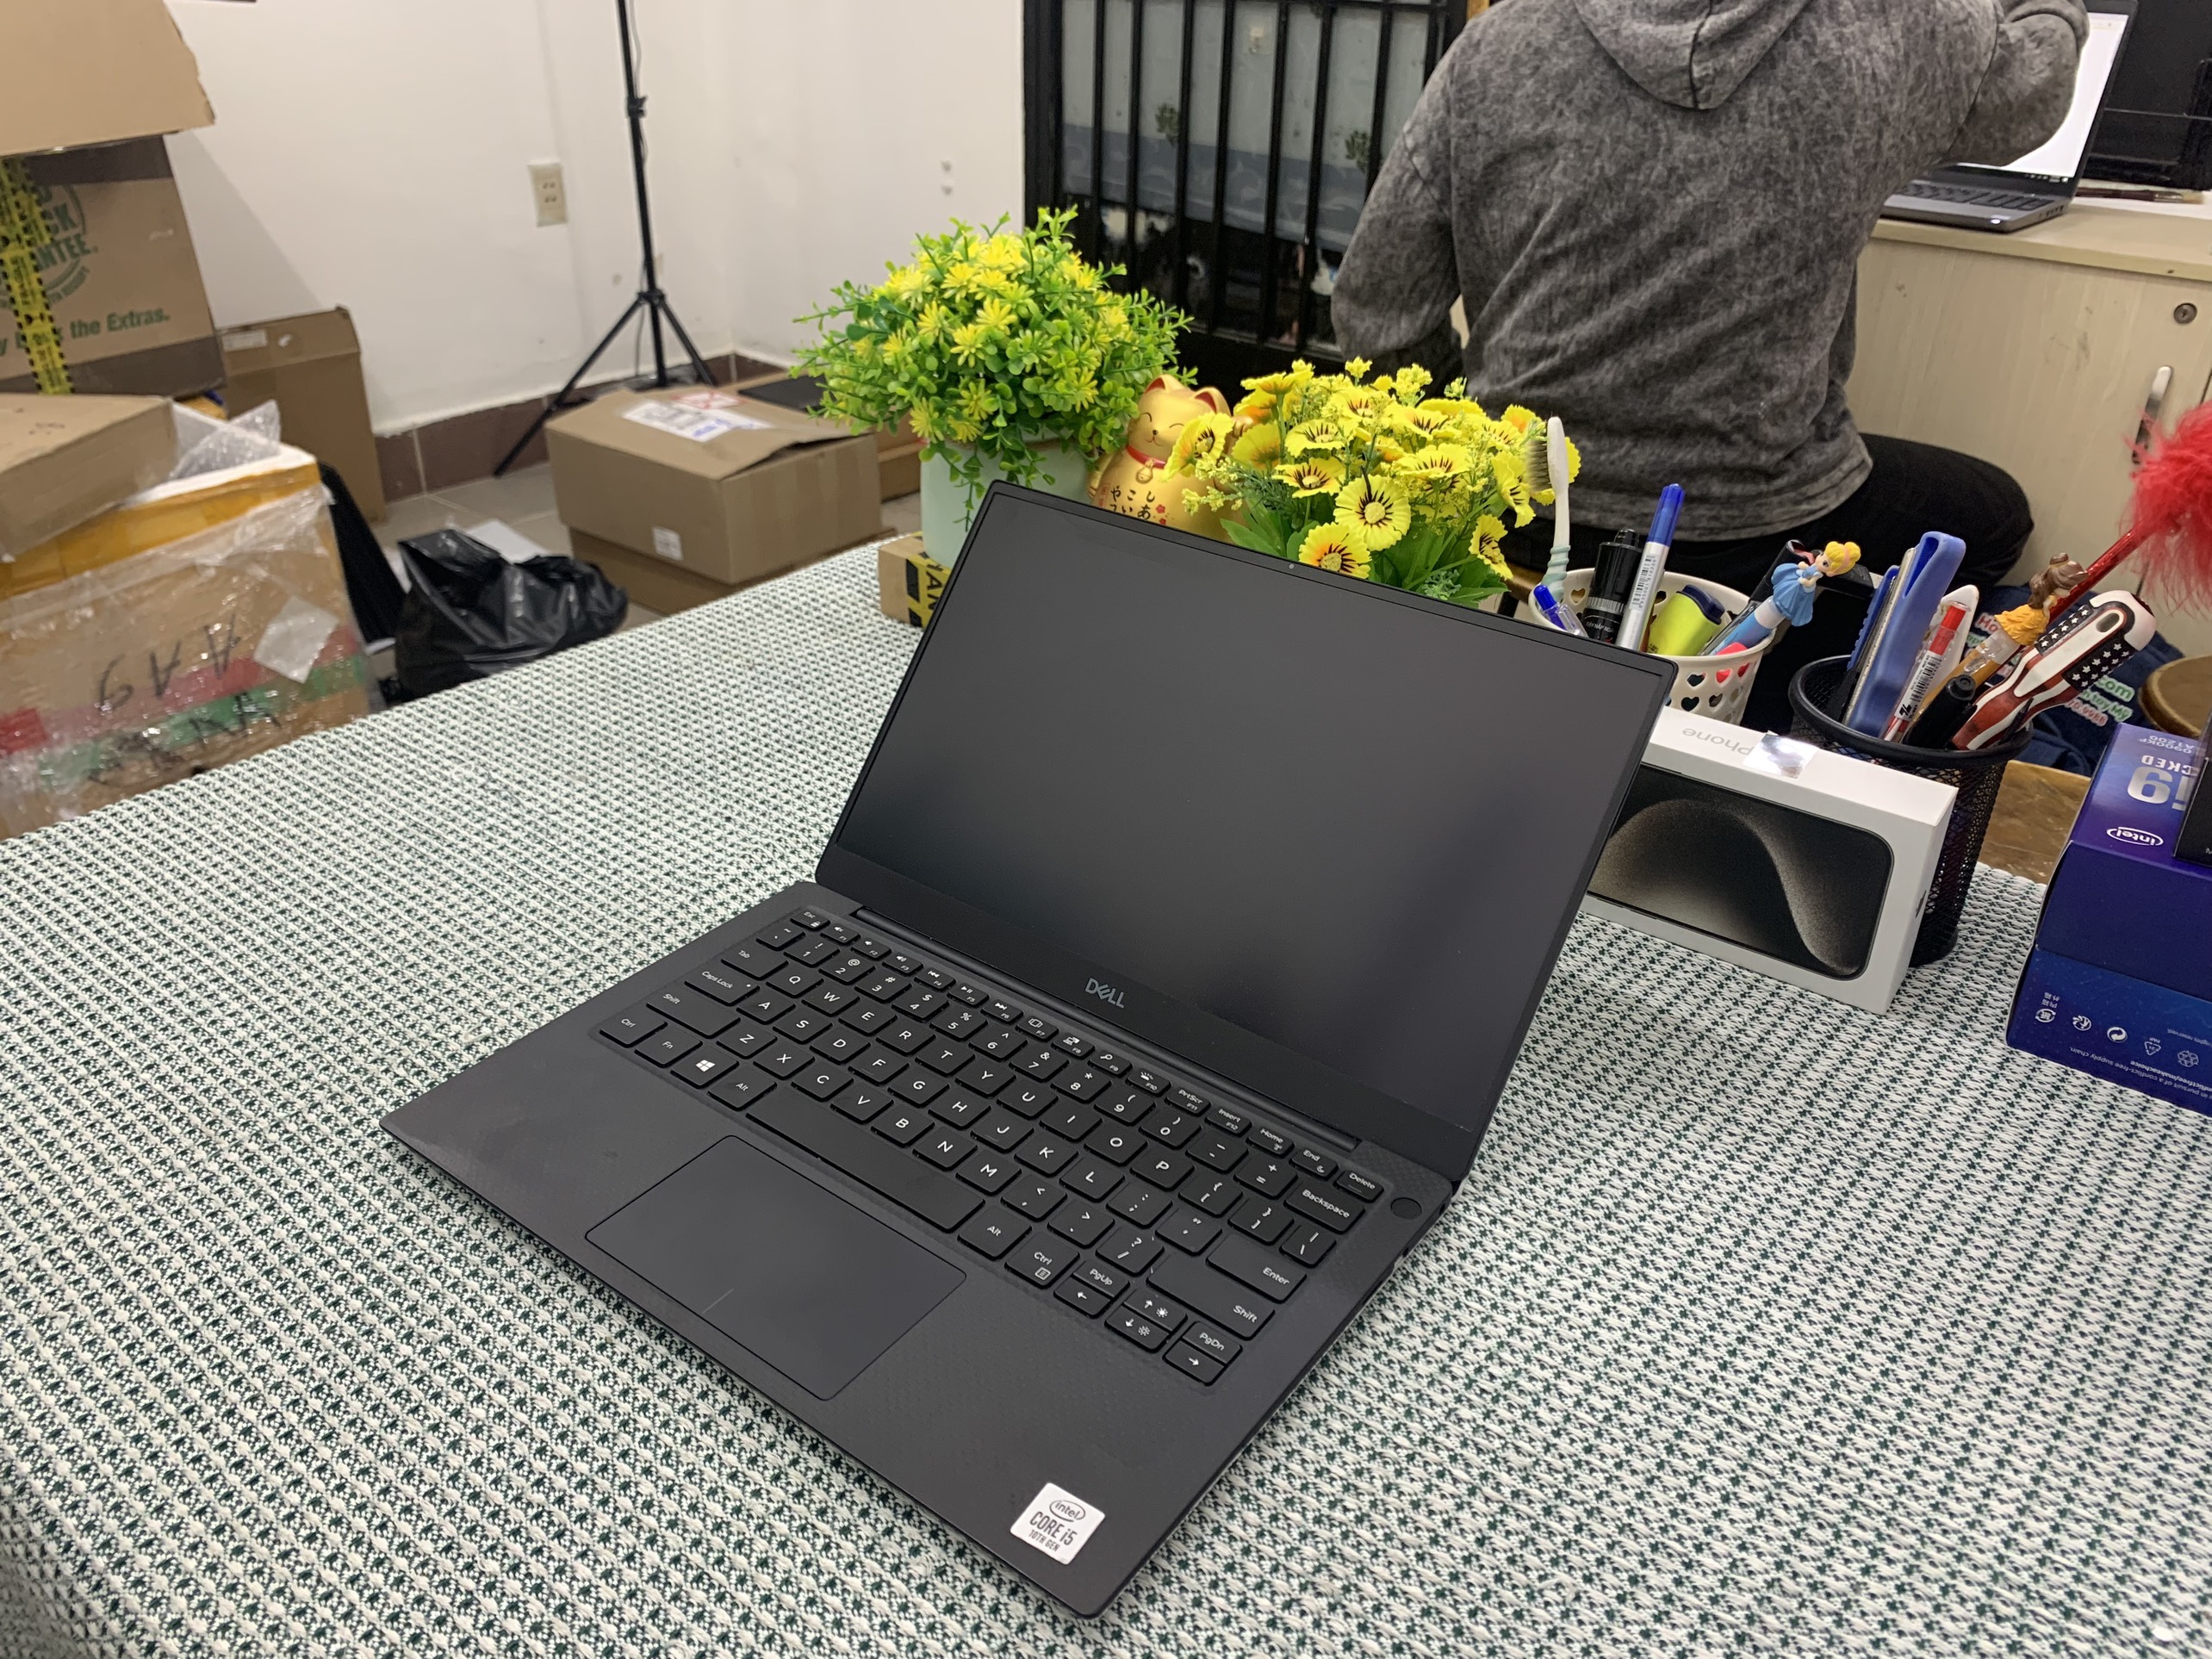 Dell XPS 13 7390